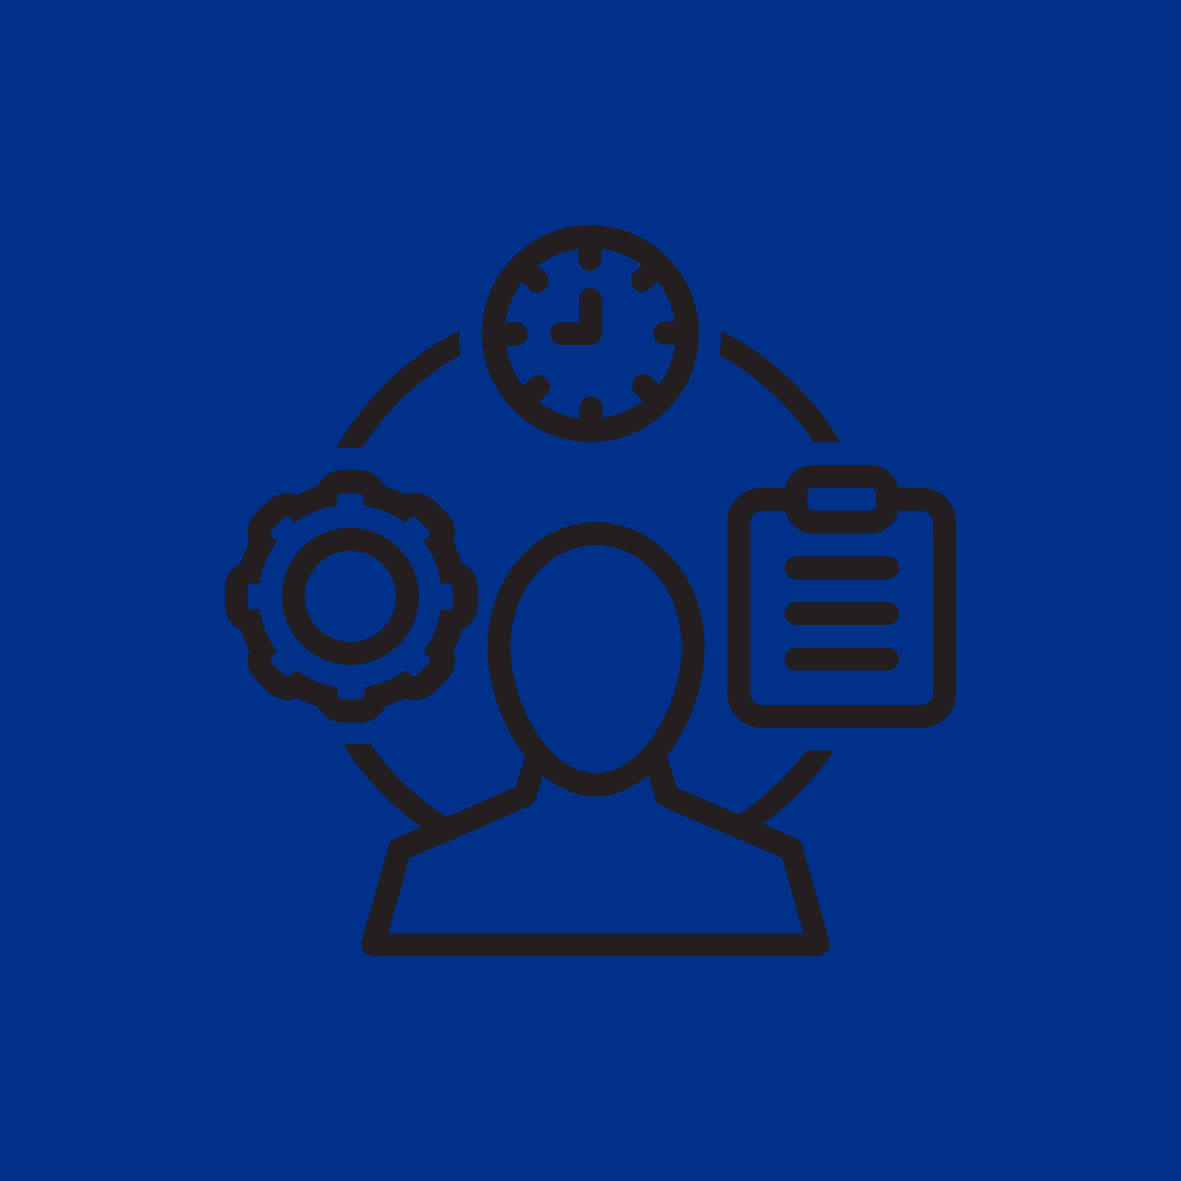 Clock, Cog Wheel, Clipboard and Person Icon to Depict Management